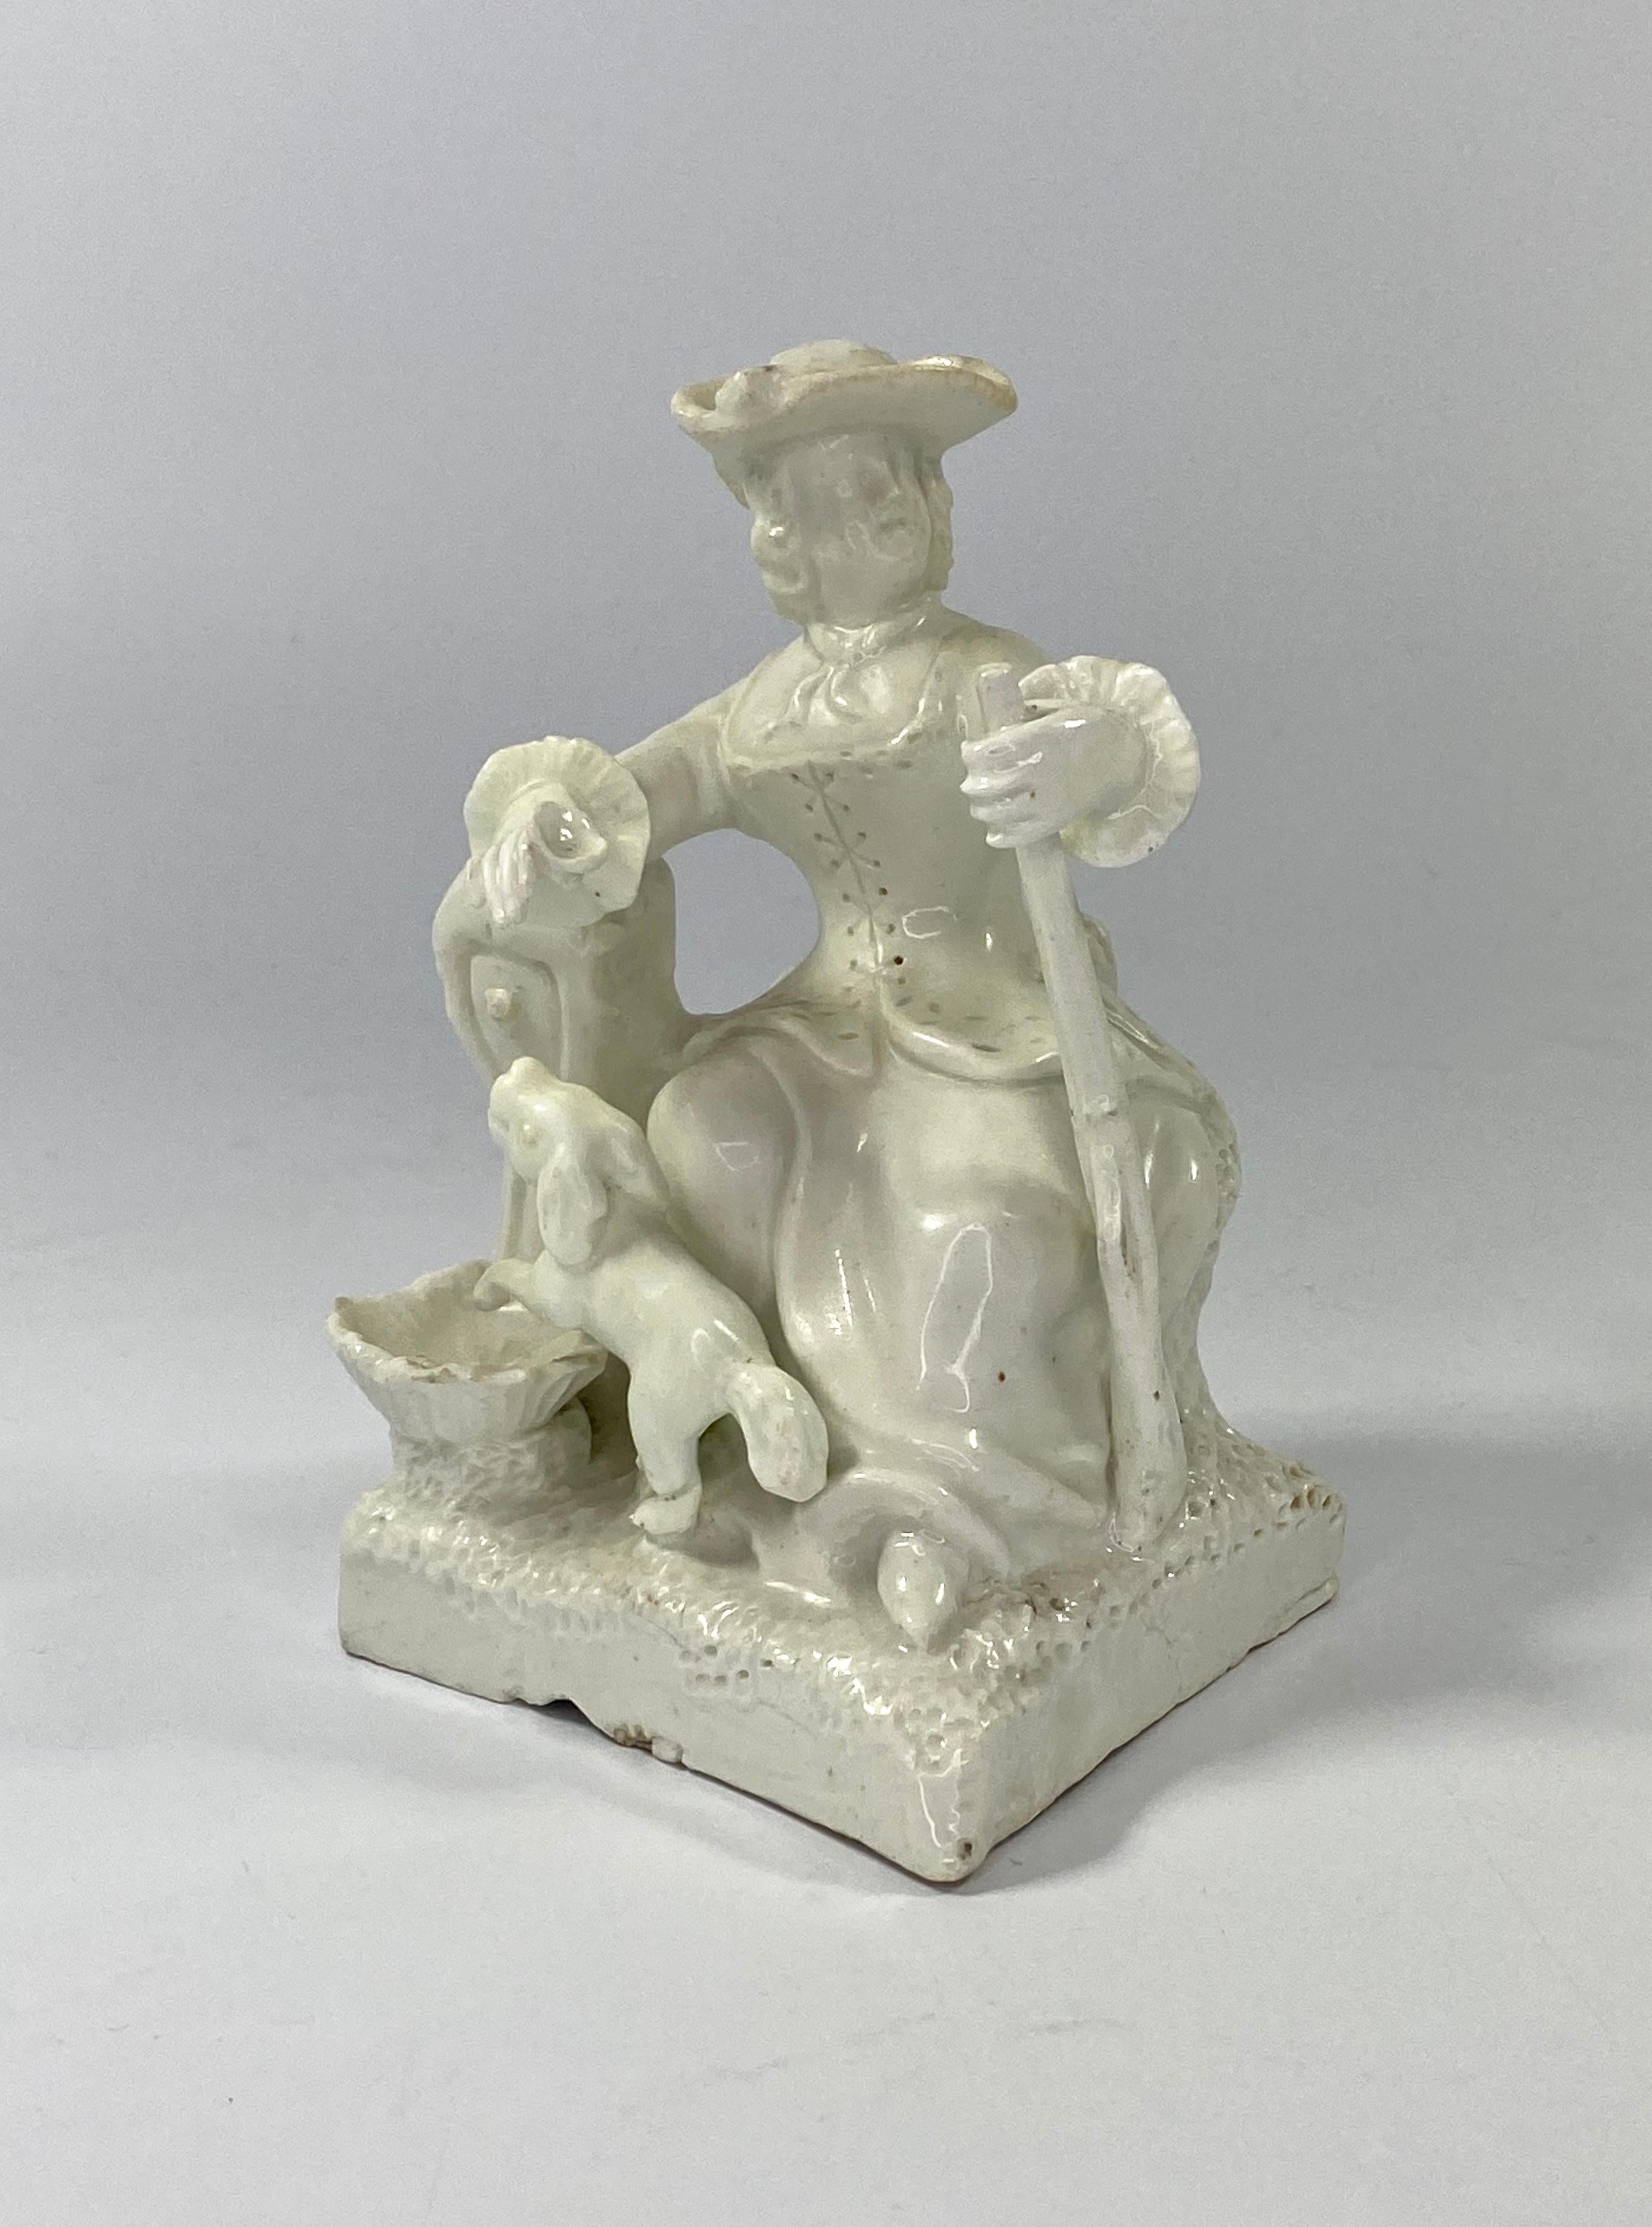 A rare bow porcelain figure of a Huntress, c. 1750. The white glazed figure of a seated lady, holding a gun in her left hand. She holds a glass in her right hand, whilst resting her arm on a fountain, above a shell reservoir. A dog, standing on its